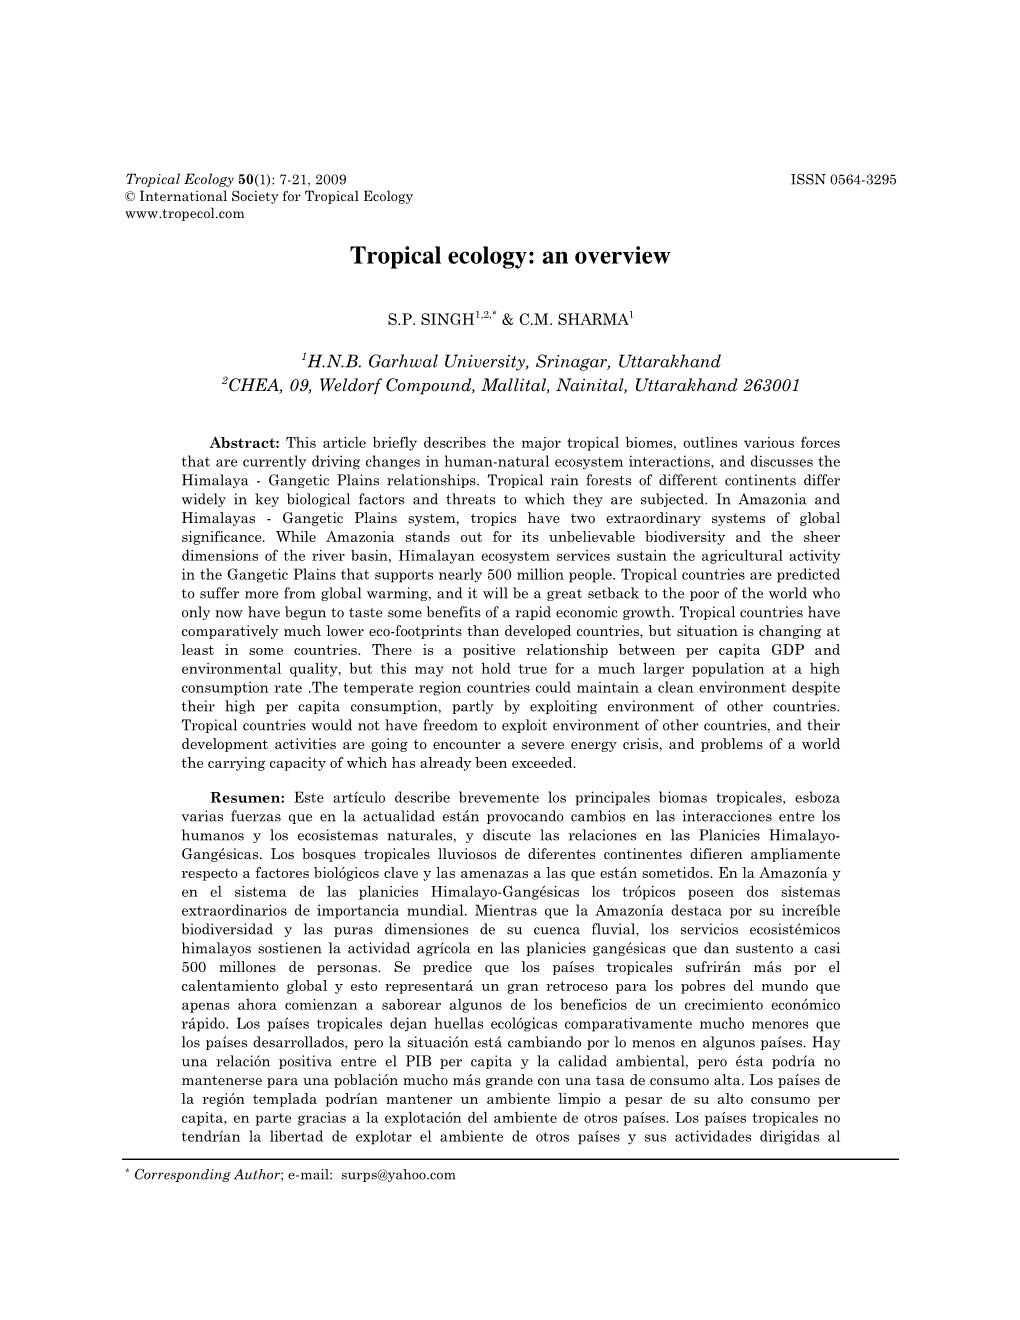 International Society for Tropical Ecology Tropical Ecology: an Overview